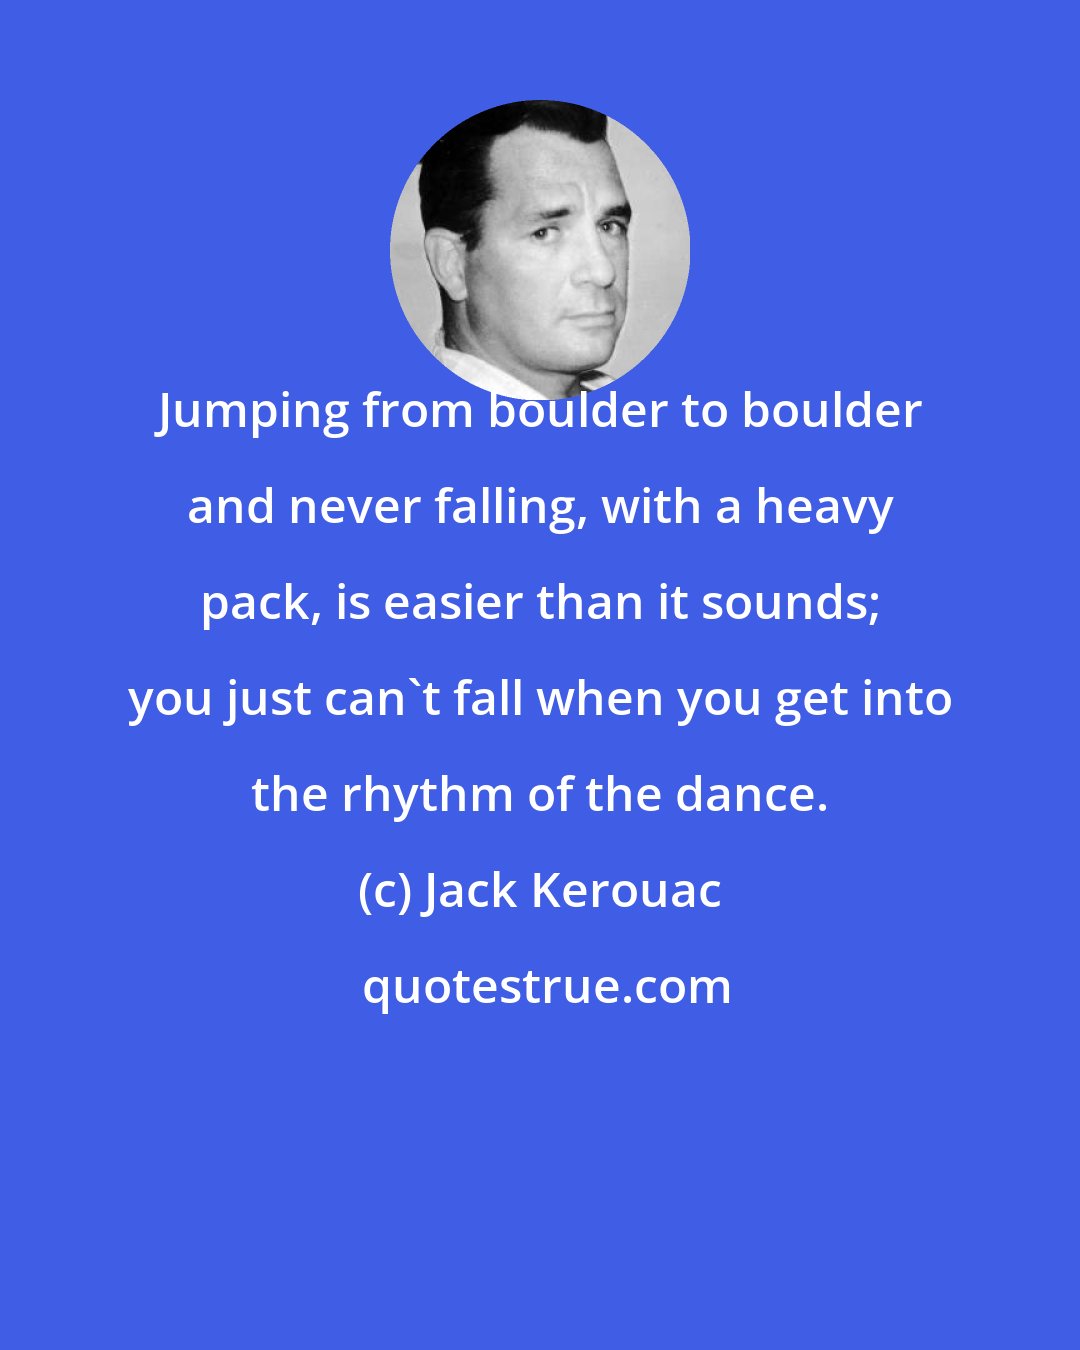 Jack Kerouac: Jumping from boulder to boulder and never falling, with a heavy pack, is easier than it sounds; you just can't fall when you get into the rhythm of the dance.